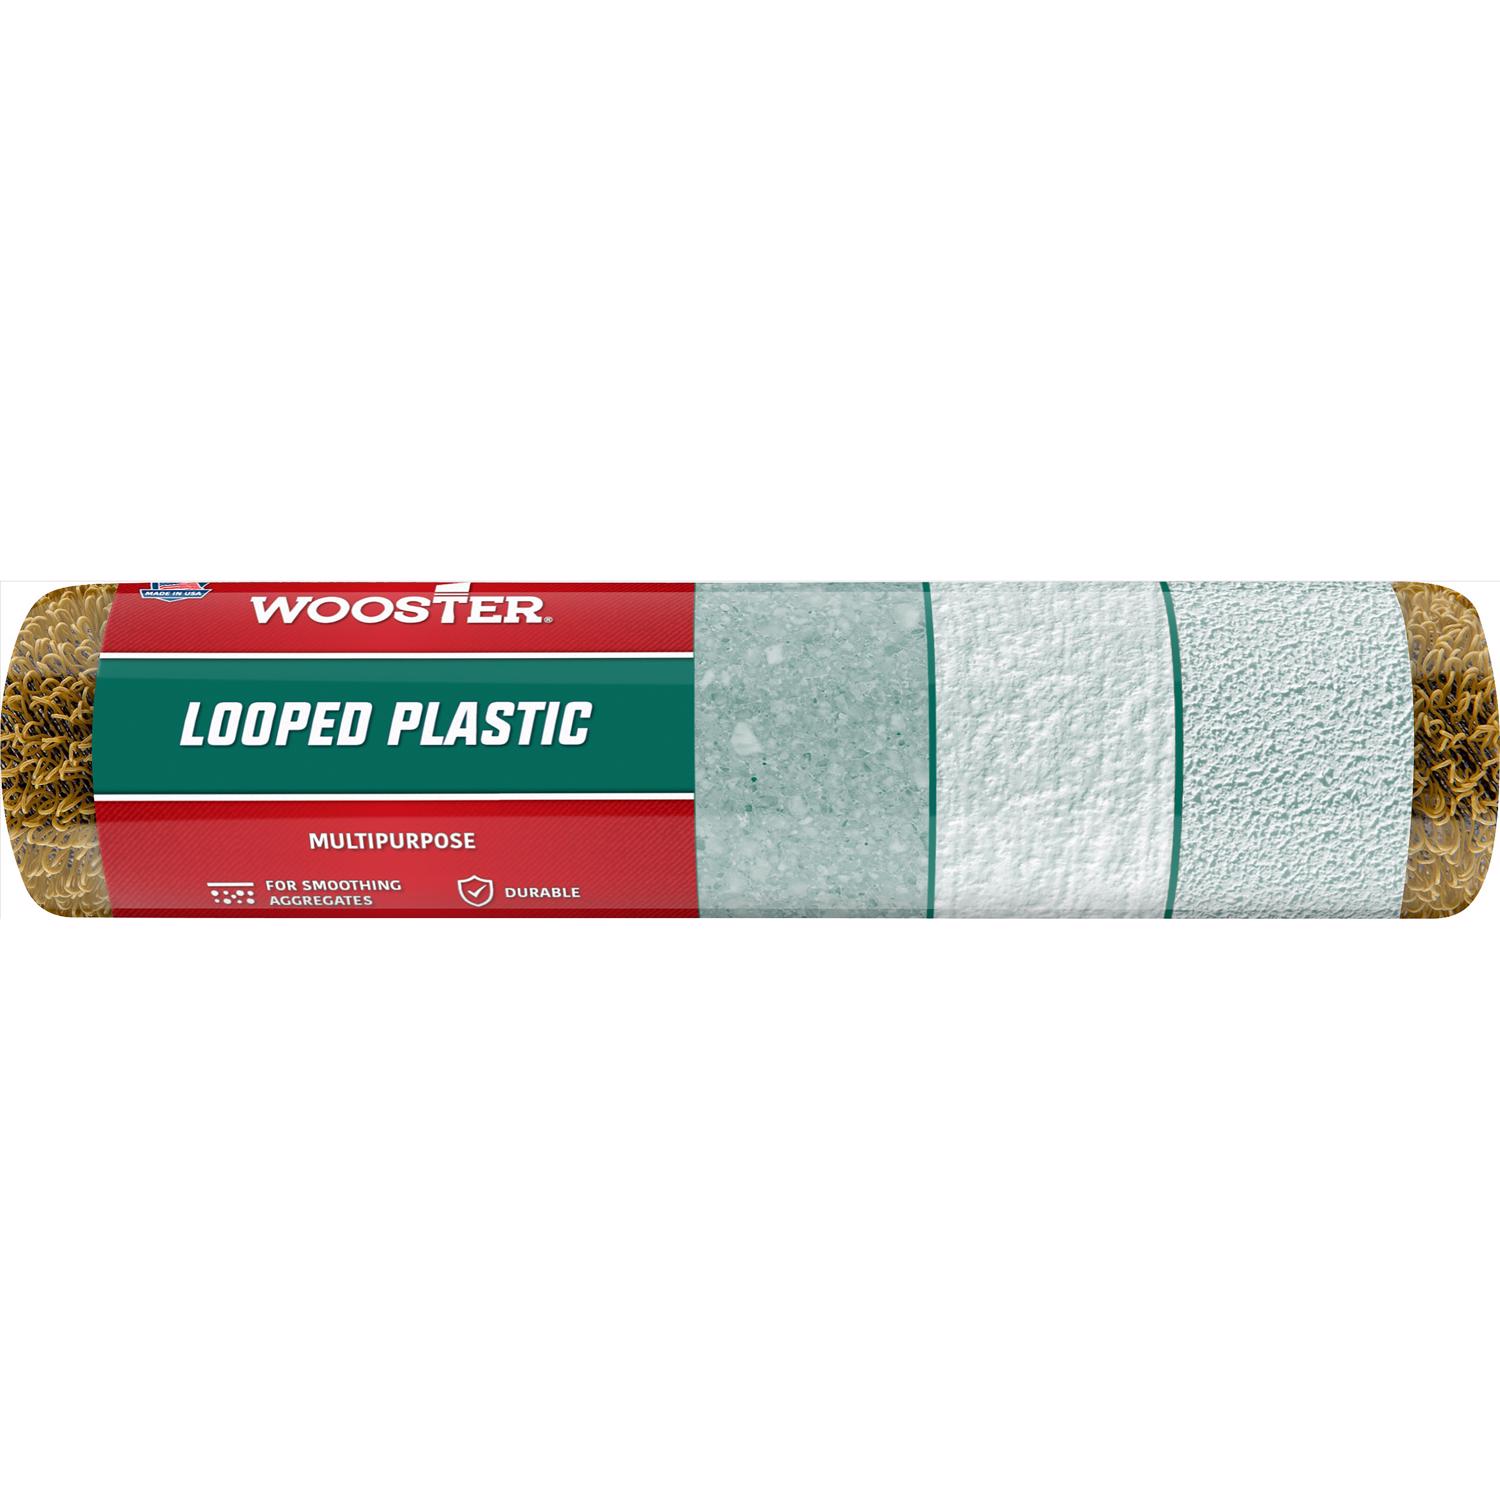 Photos - Putty Knife / Painting Tool Wooster Looped Plastic Plastic 9 in. W Texture Paint Roller Cover 1 pk R23